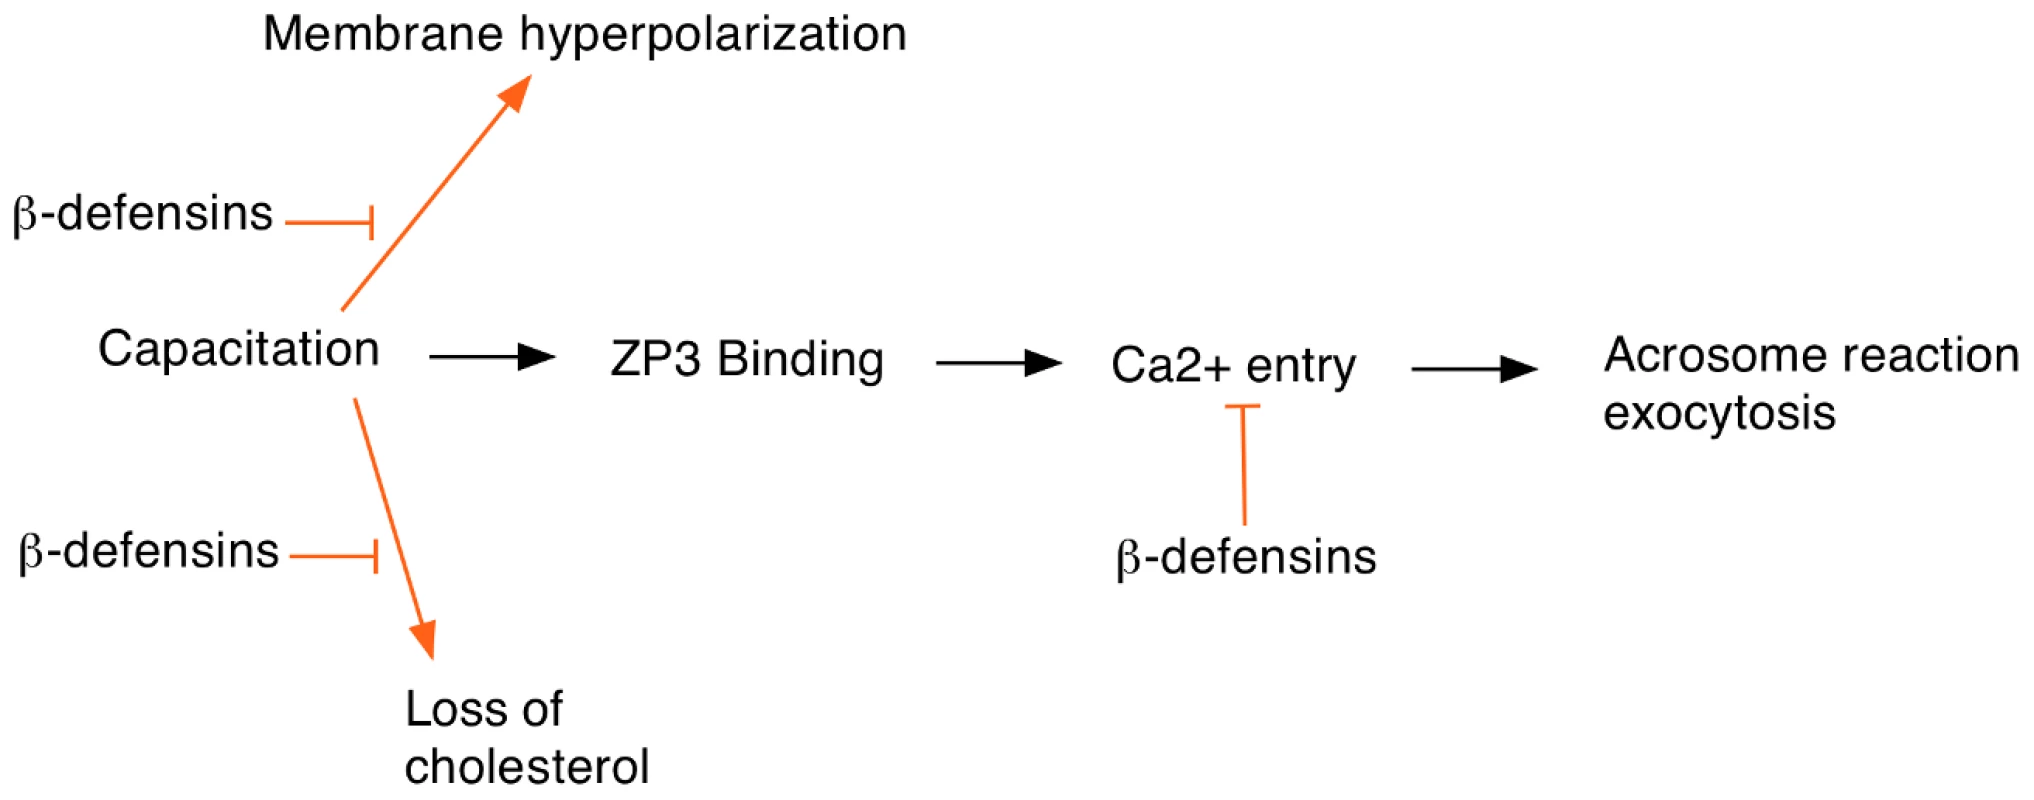 Events at egg fertilization and the possible roles of ß-defensin proteins in regulating this process.